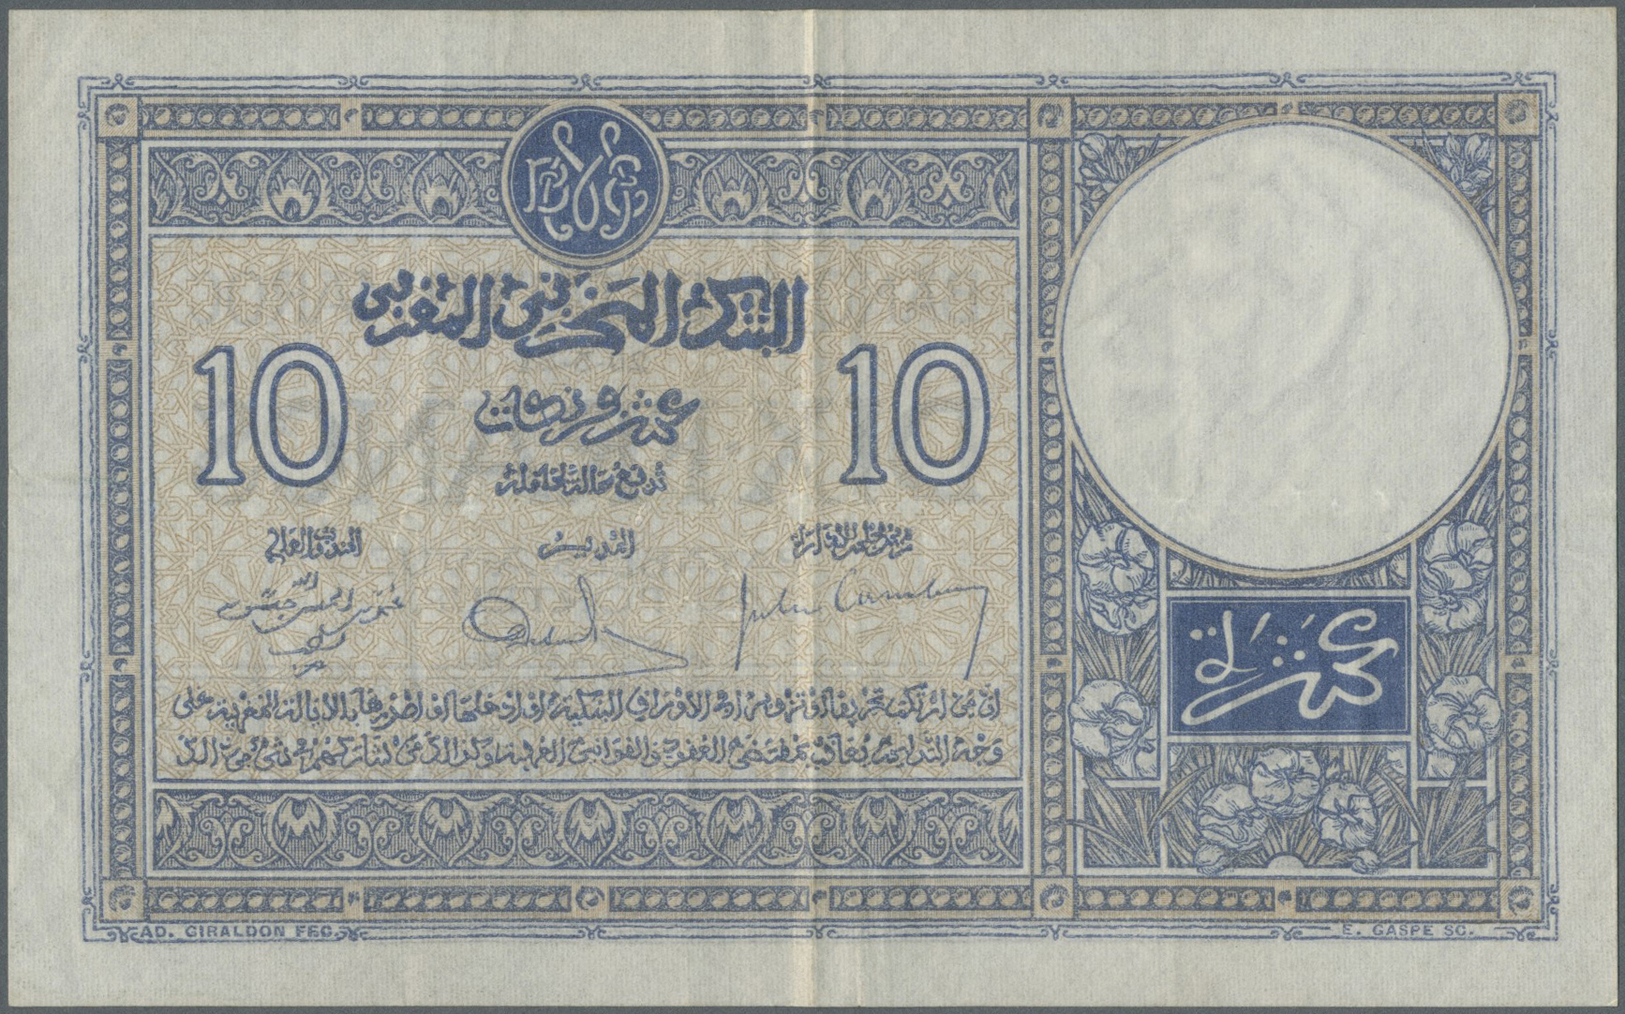 01739 Morocco / Marokko: 10 Francs 1931 P. 17a, Used With Folds In Paper But No Holes Or Tears, Paper Still Very Clean A - Morocco